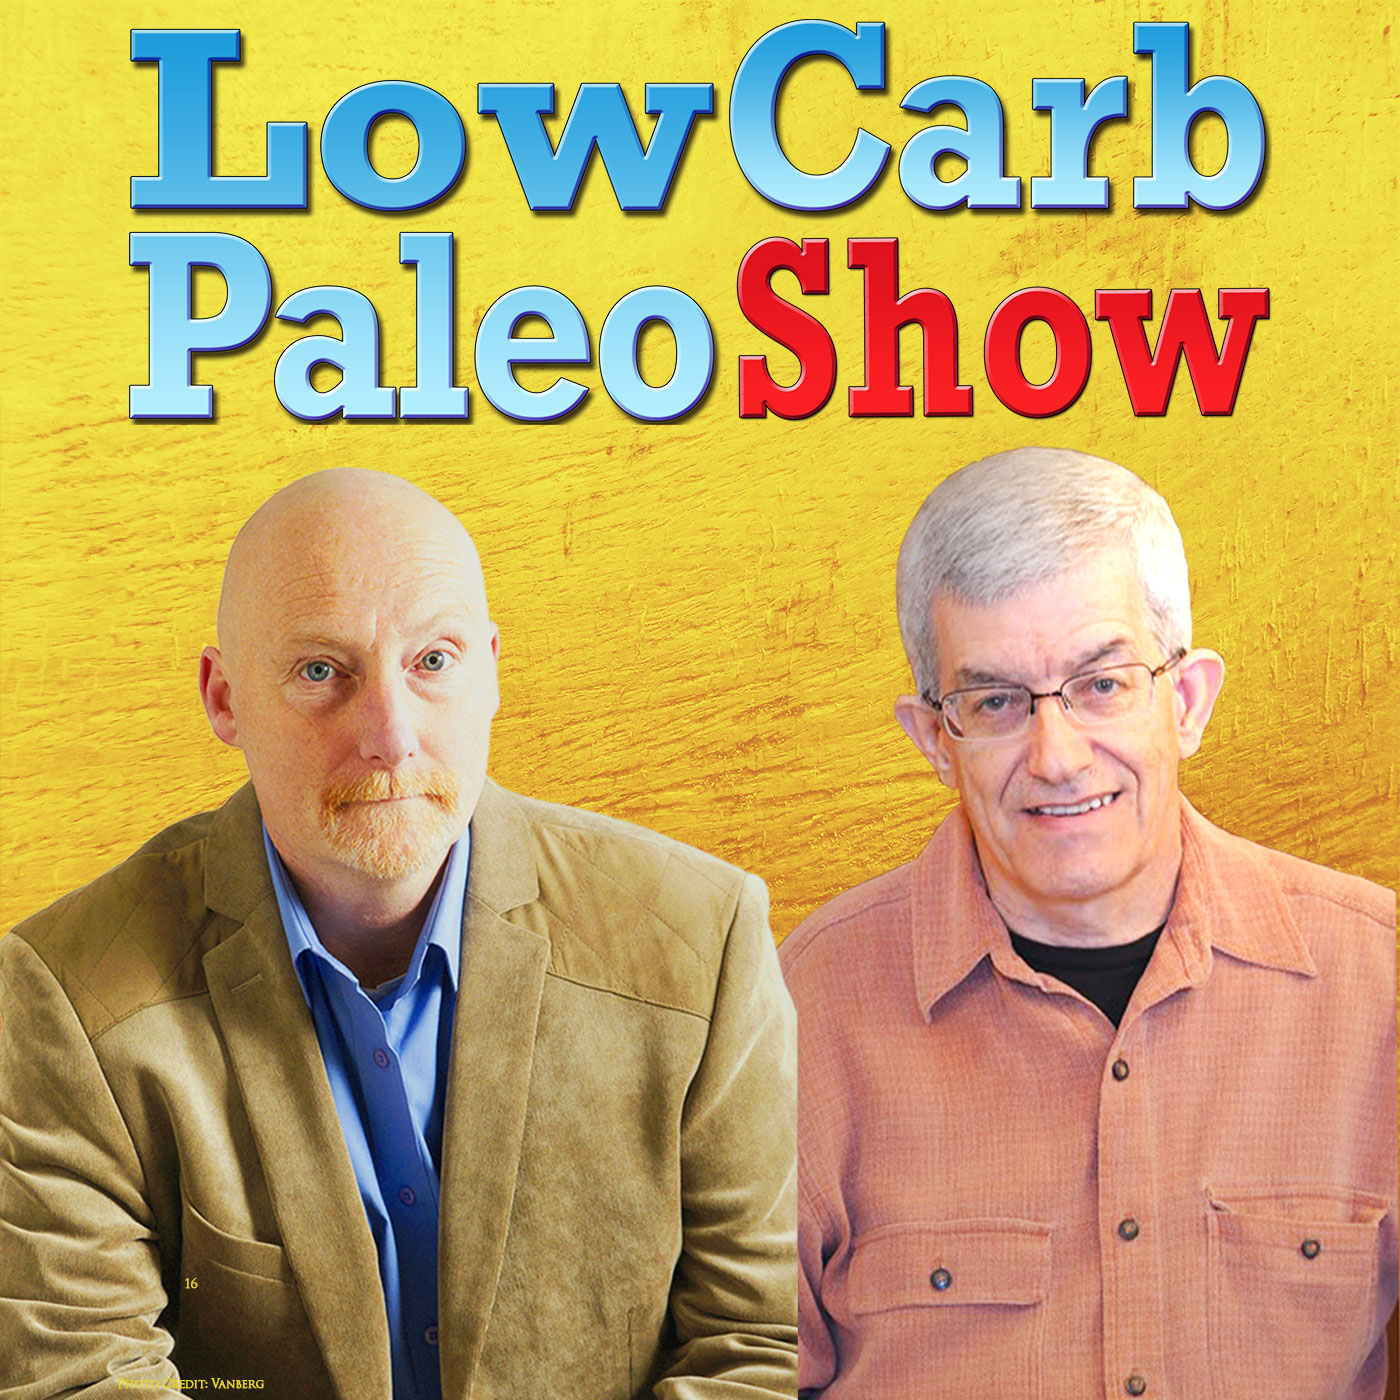 Low Carb and Paleo Show